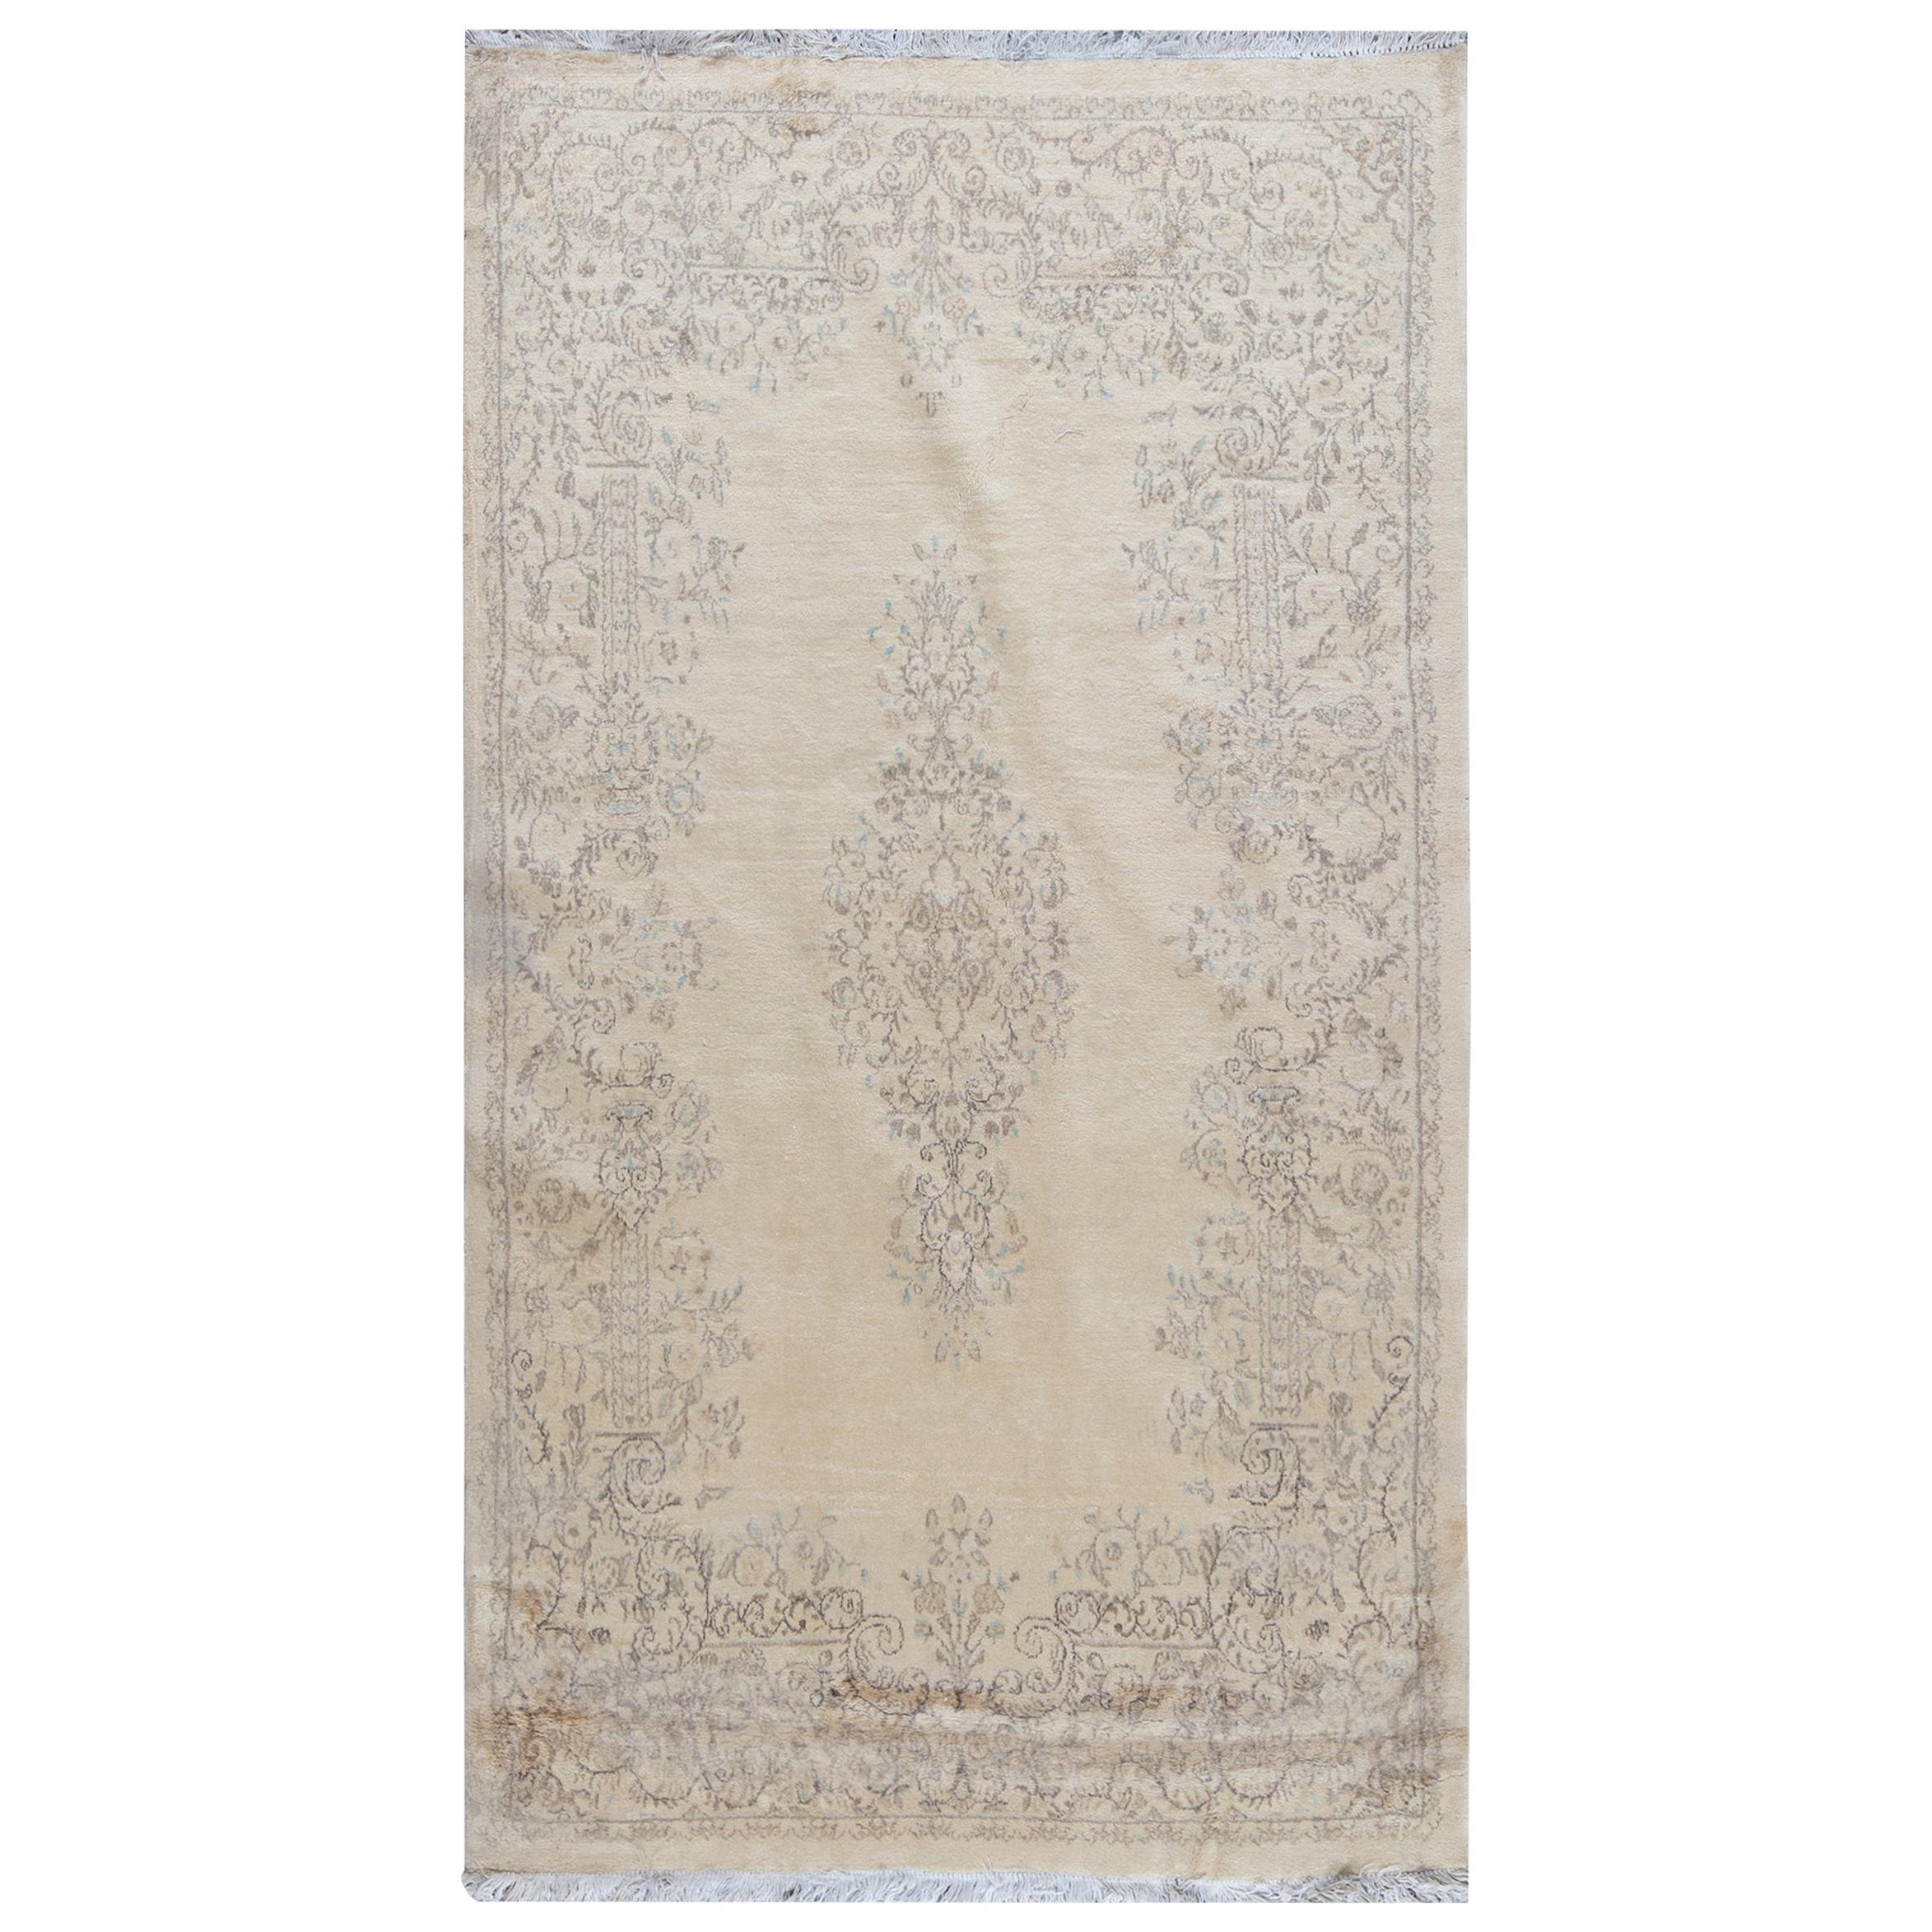 One-of-a-Kind Traditional Handwoven Wool Area Rug 4'-10" x 8'-10". For Sale